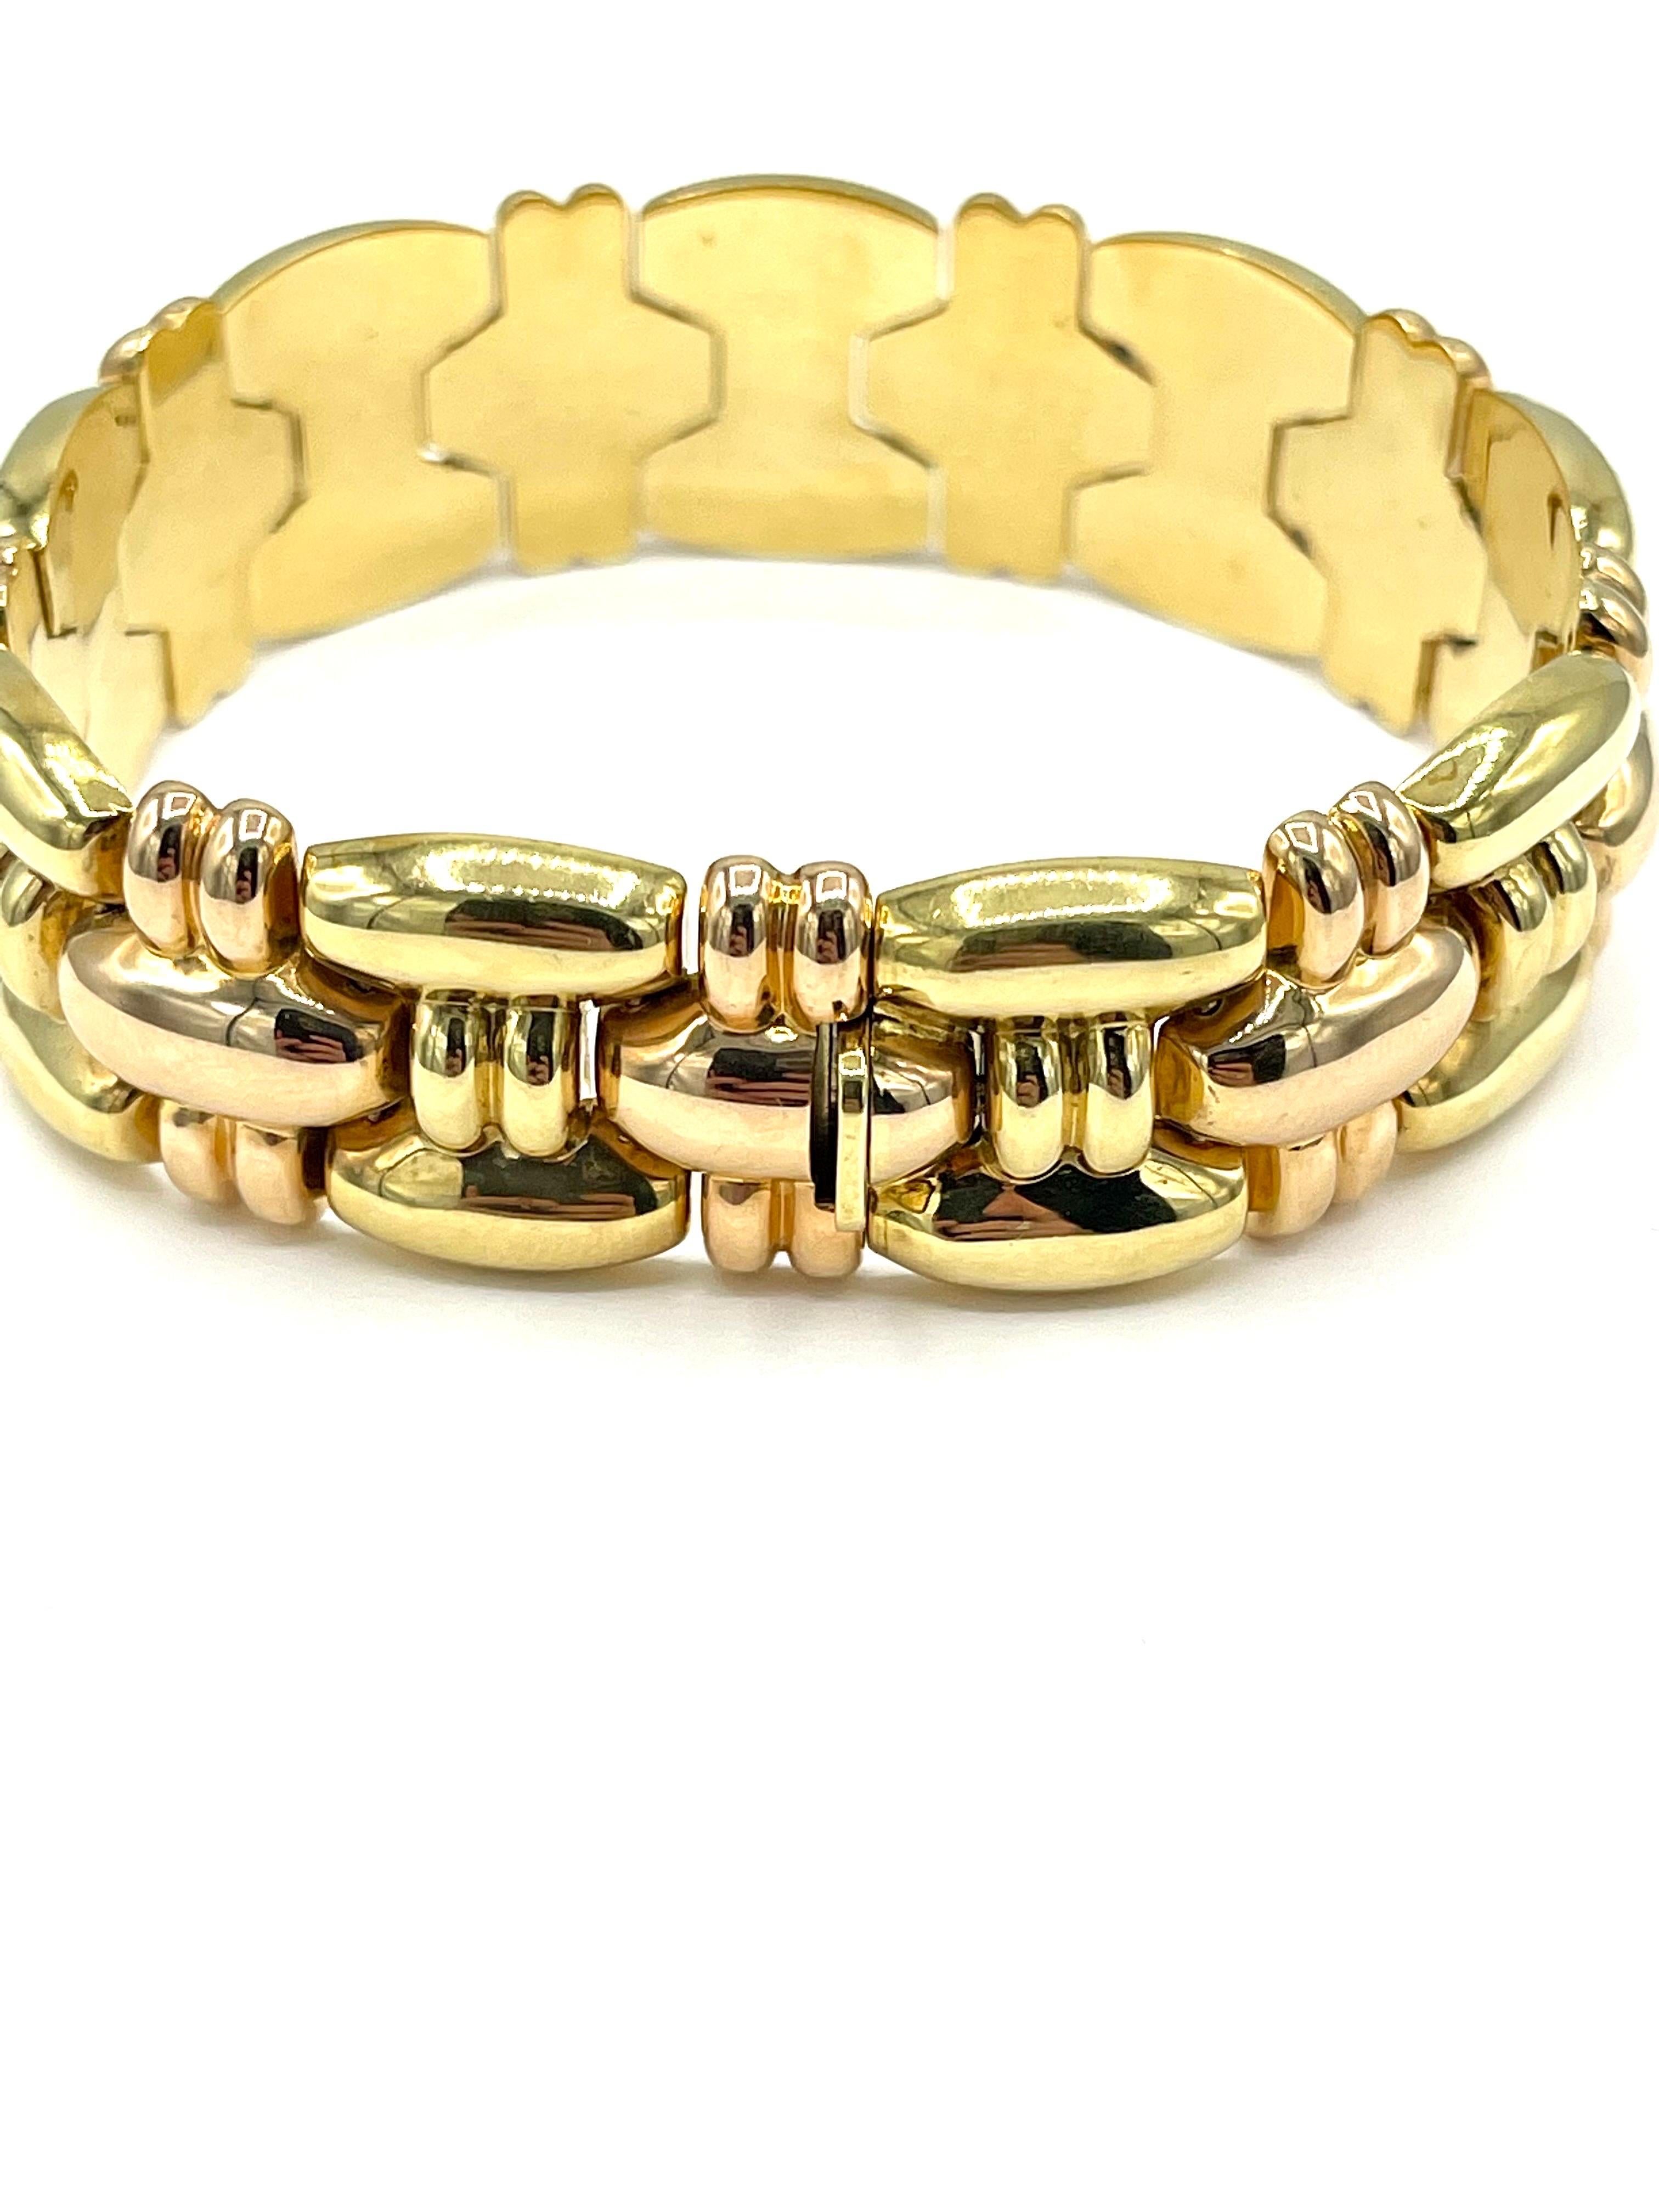 Women's or Men's 18K Pink and Yellow Gold Link Fashion Bracelet For Sale